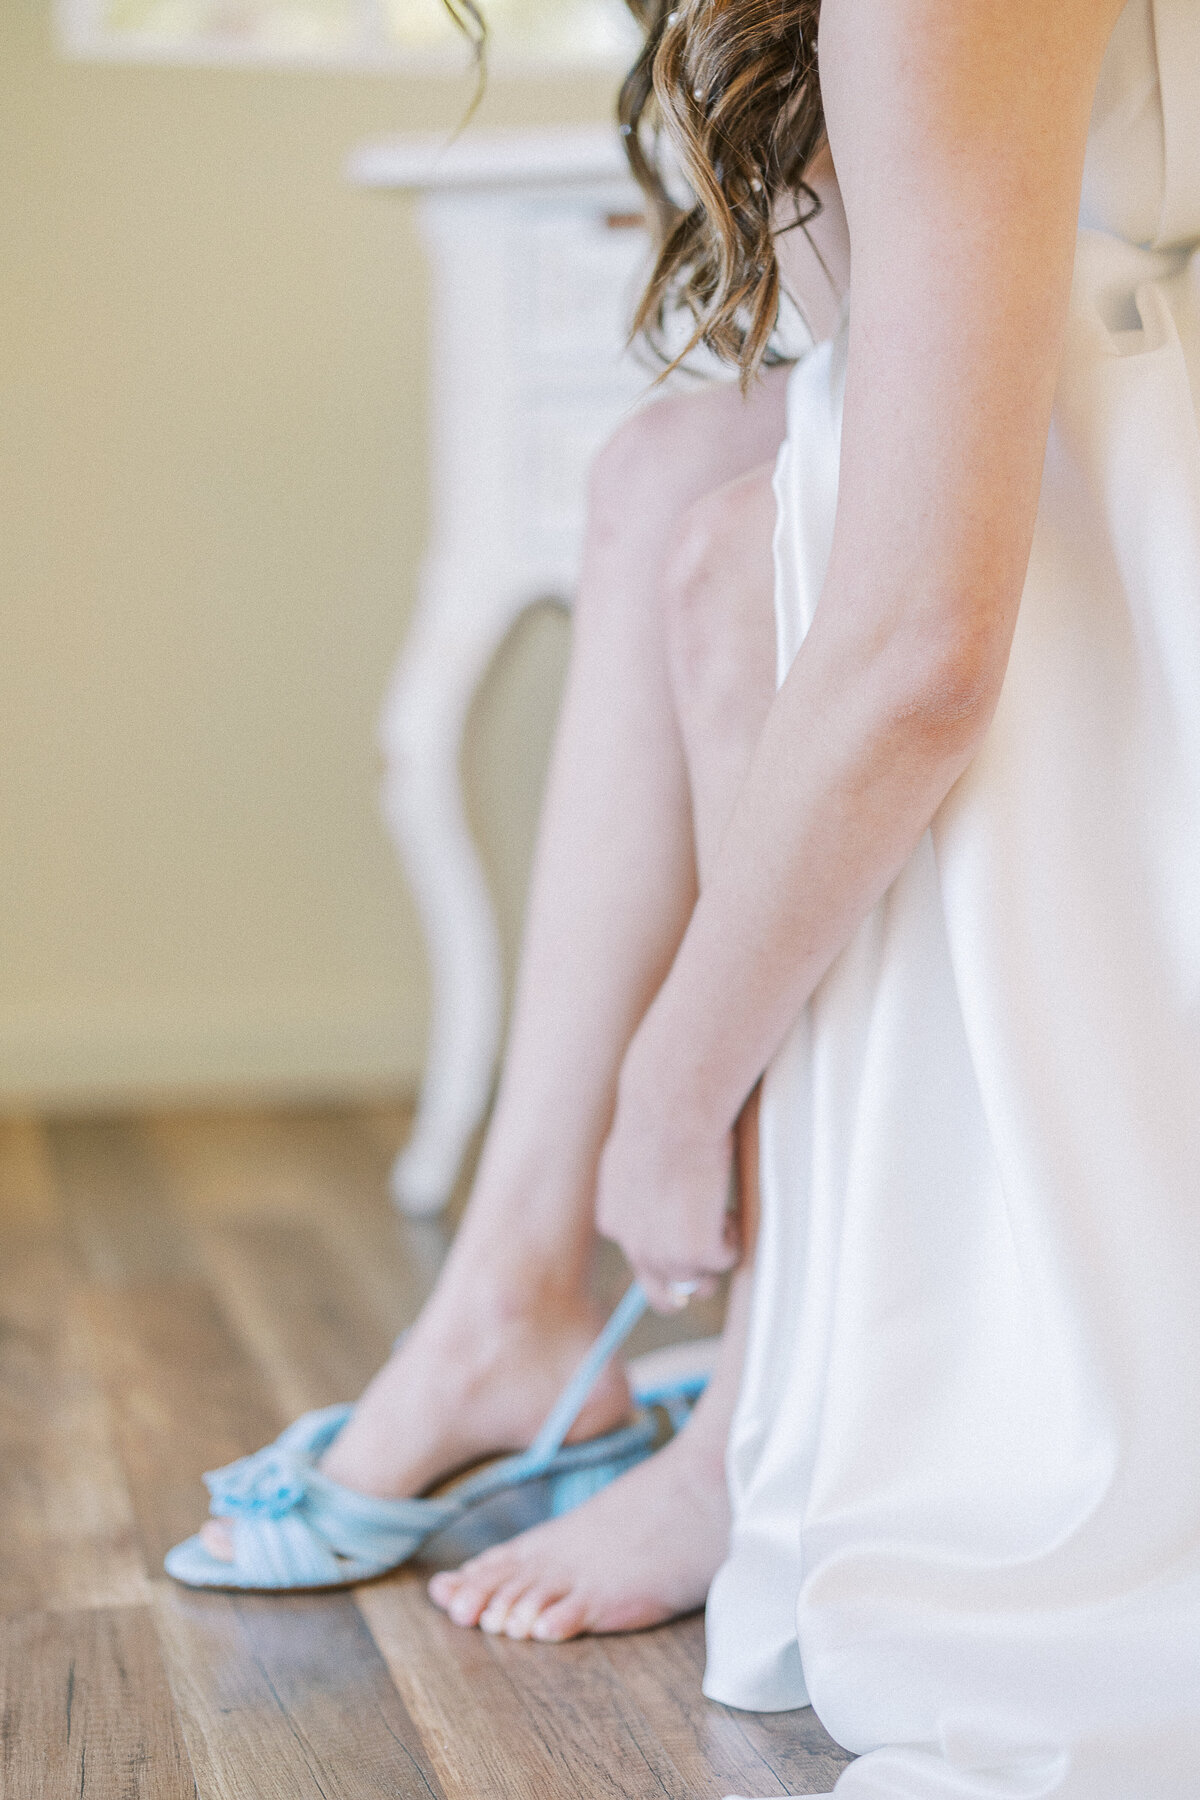 bride putting on shoes getting ready photos